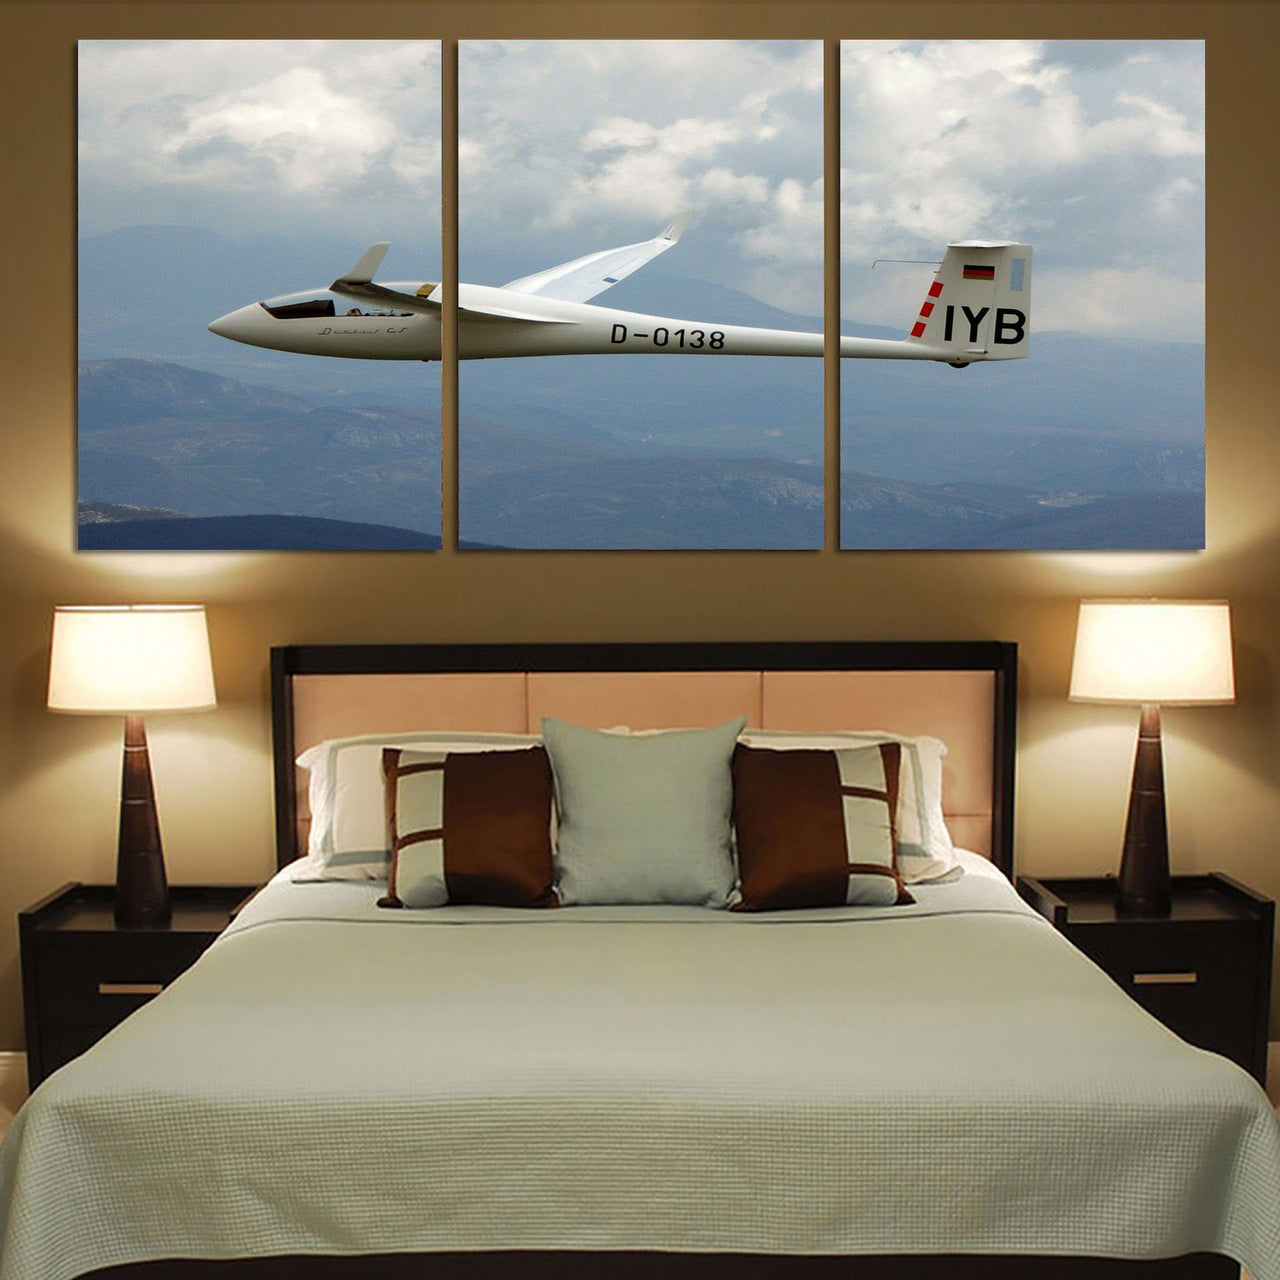 Cruising Glider at Sunset Printed Canvas Posters (3 Pieces) Aviation Shop 